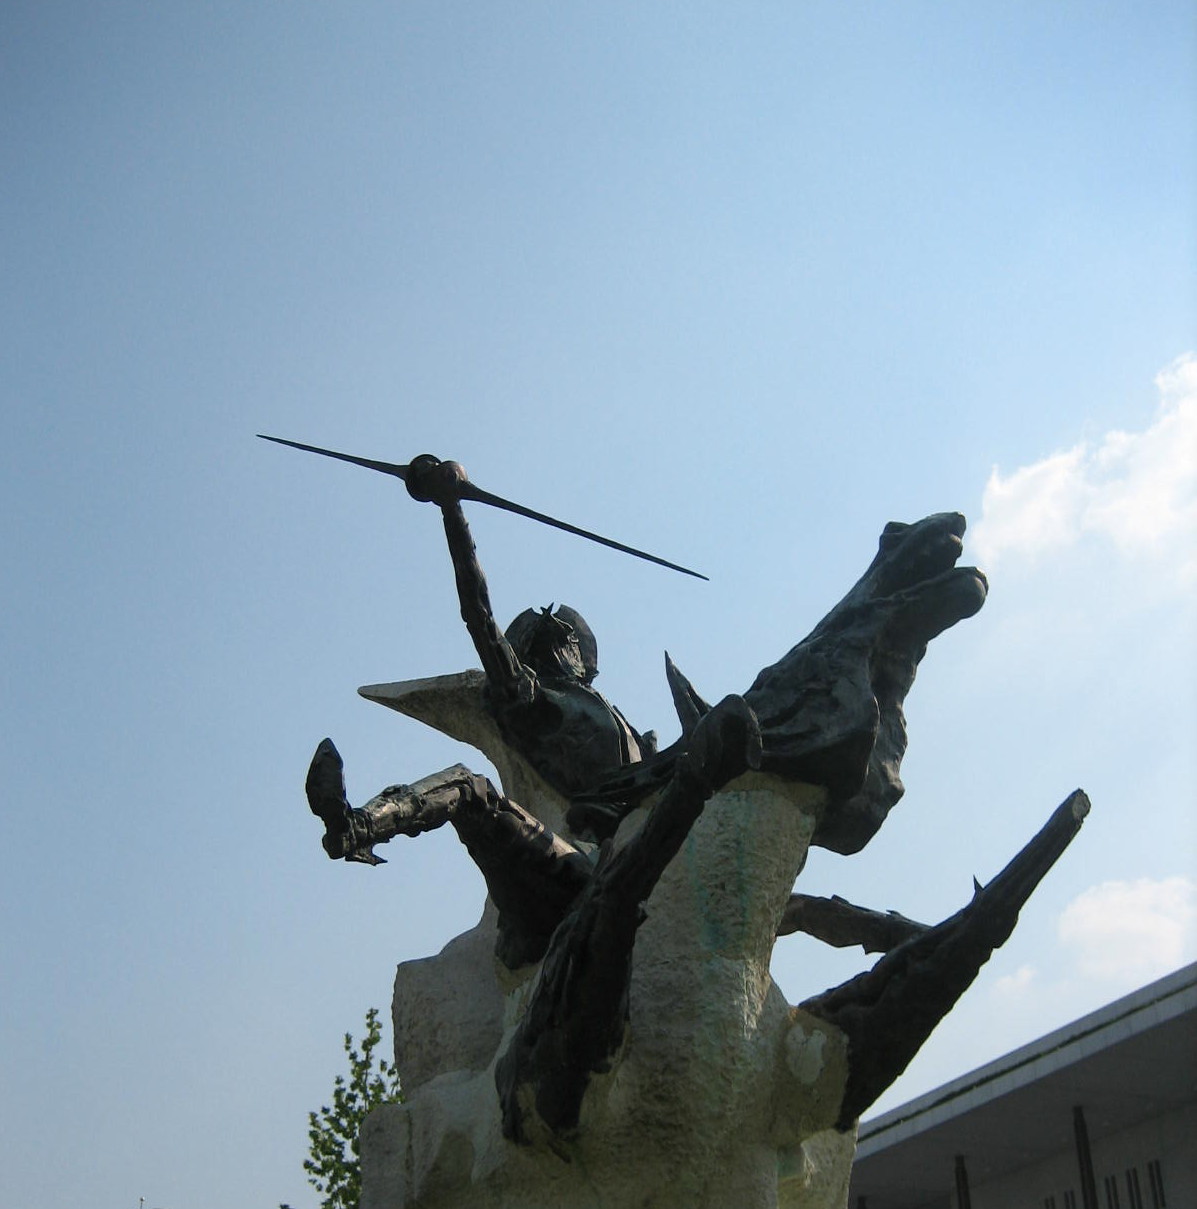 Don Quijote outside Kennedy Center. Autor, mjlaflaca